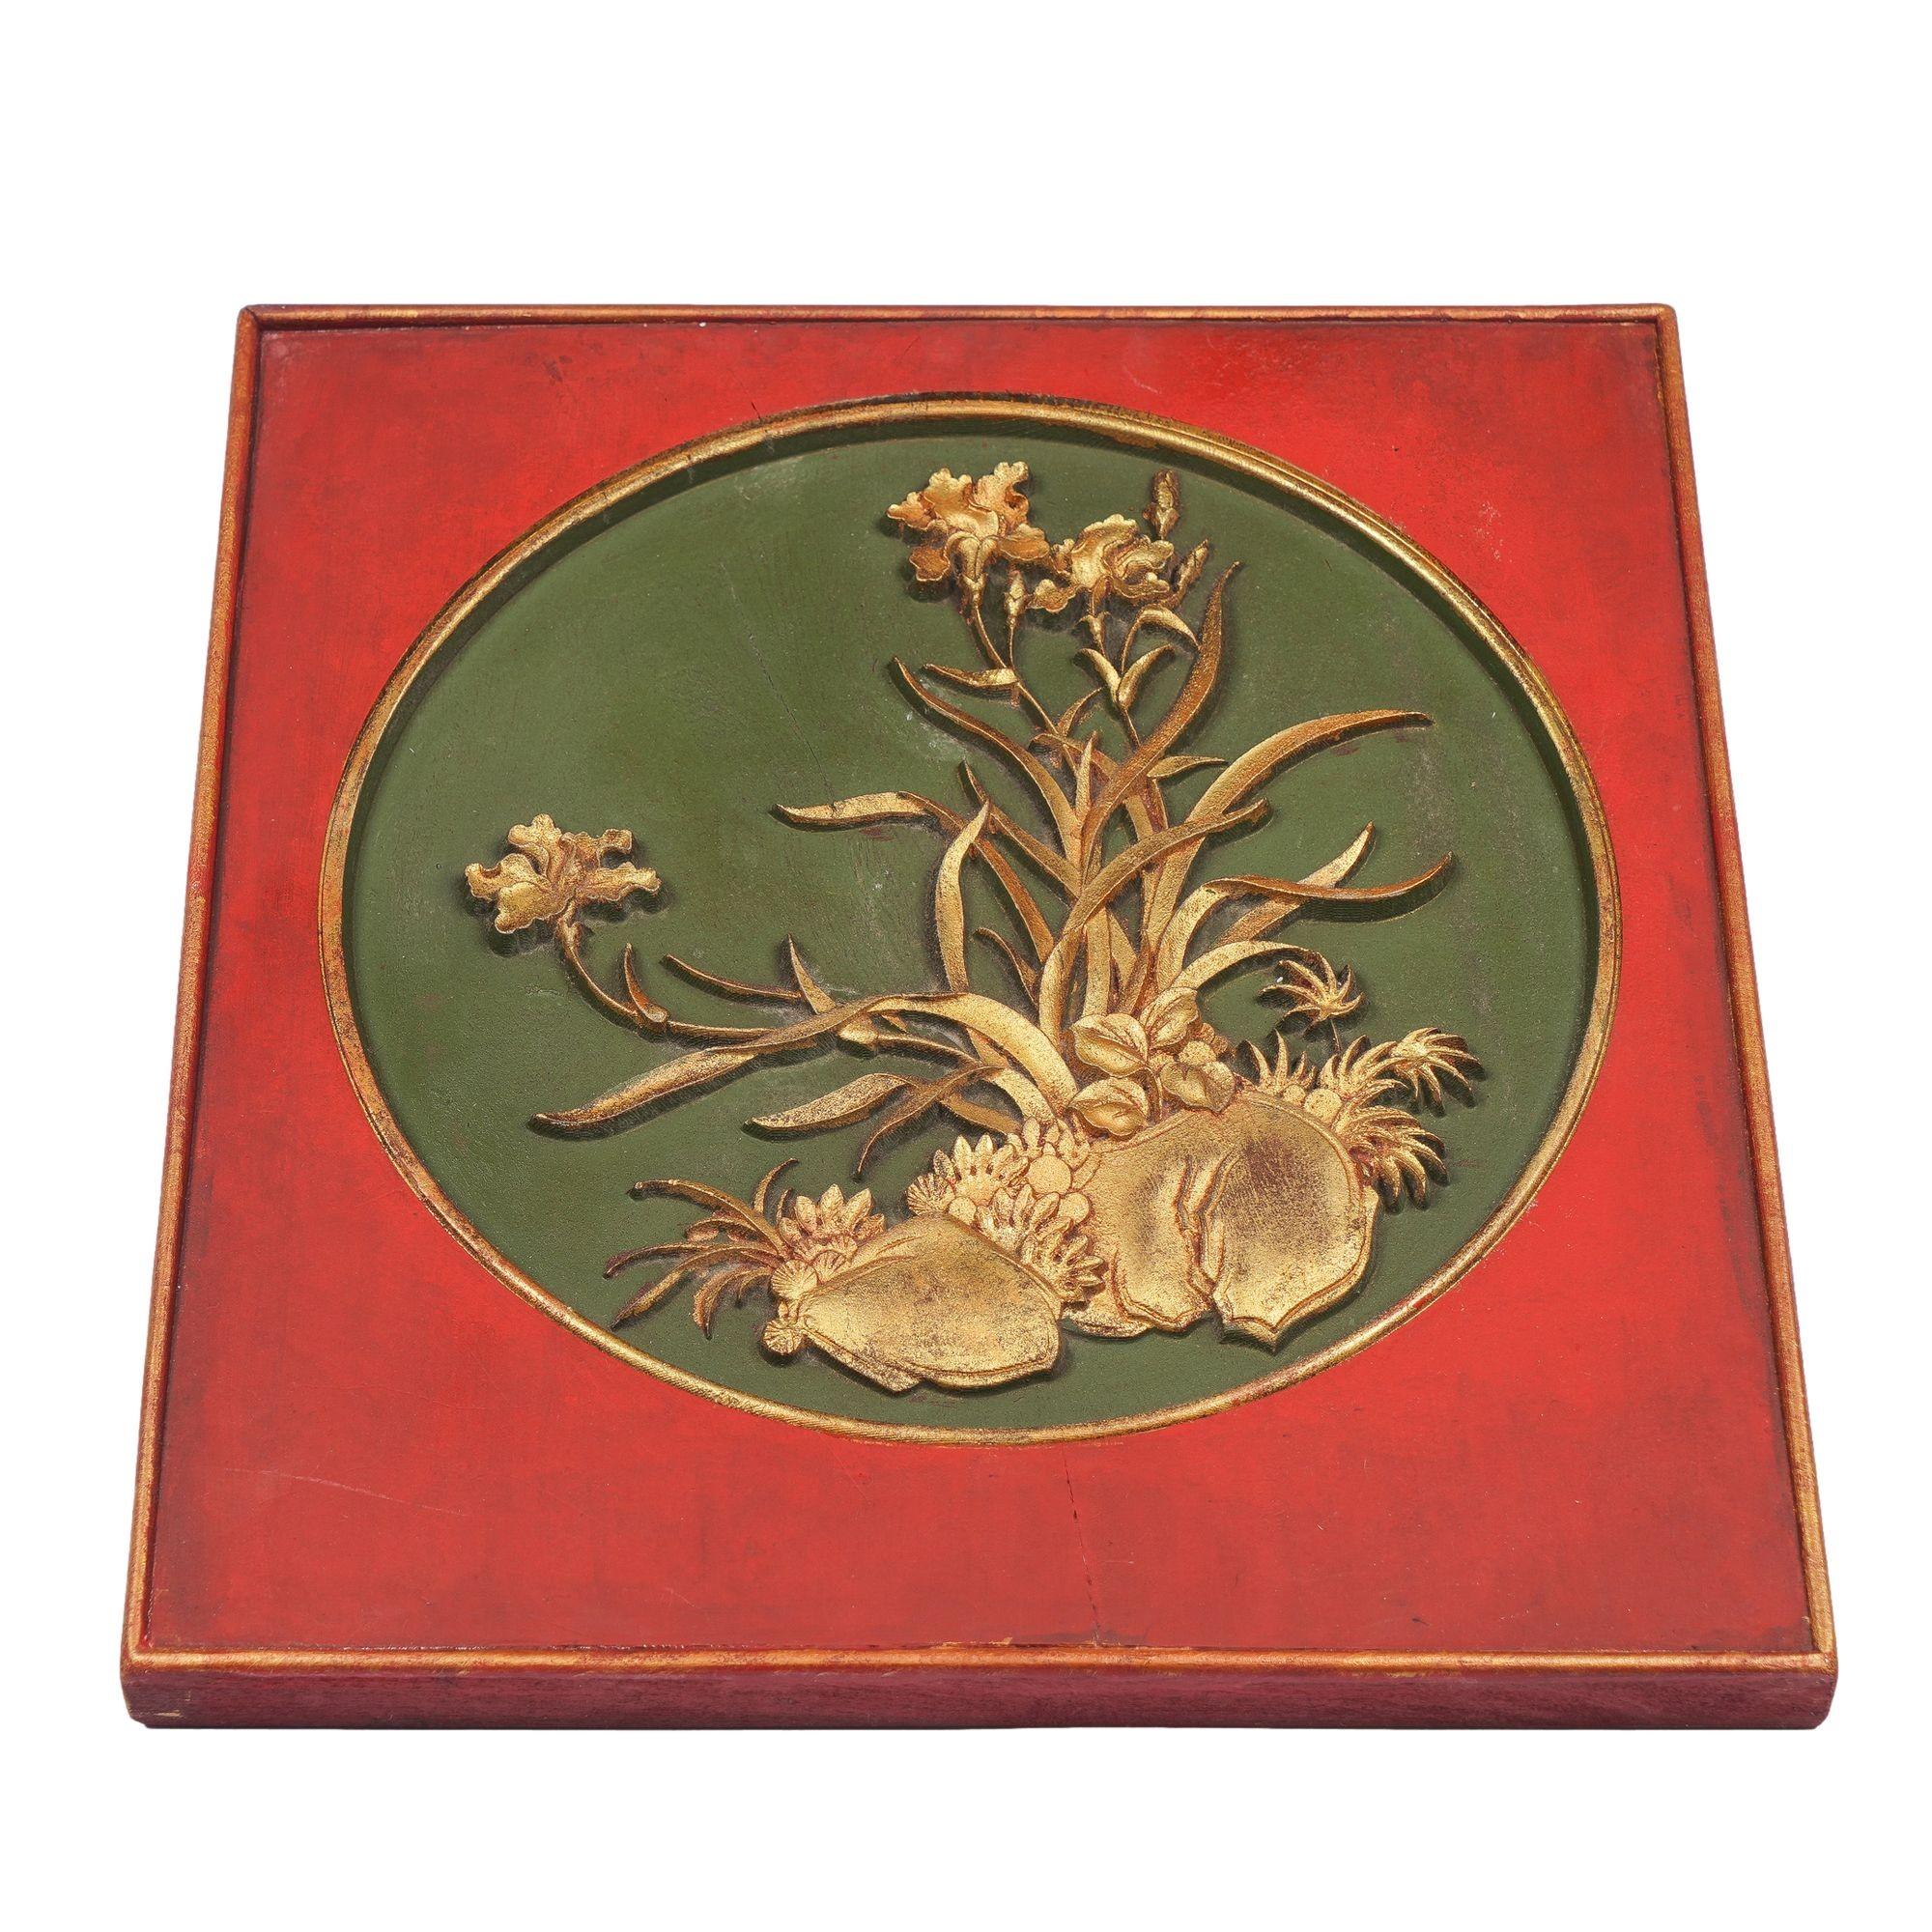 Square wood panel painted in red lacquer with a circular inset featuring shallow carved gilt cartouche on a green painted ground.
China, Qing Dynasty, 19th century.